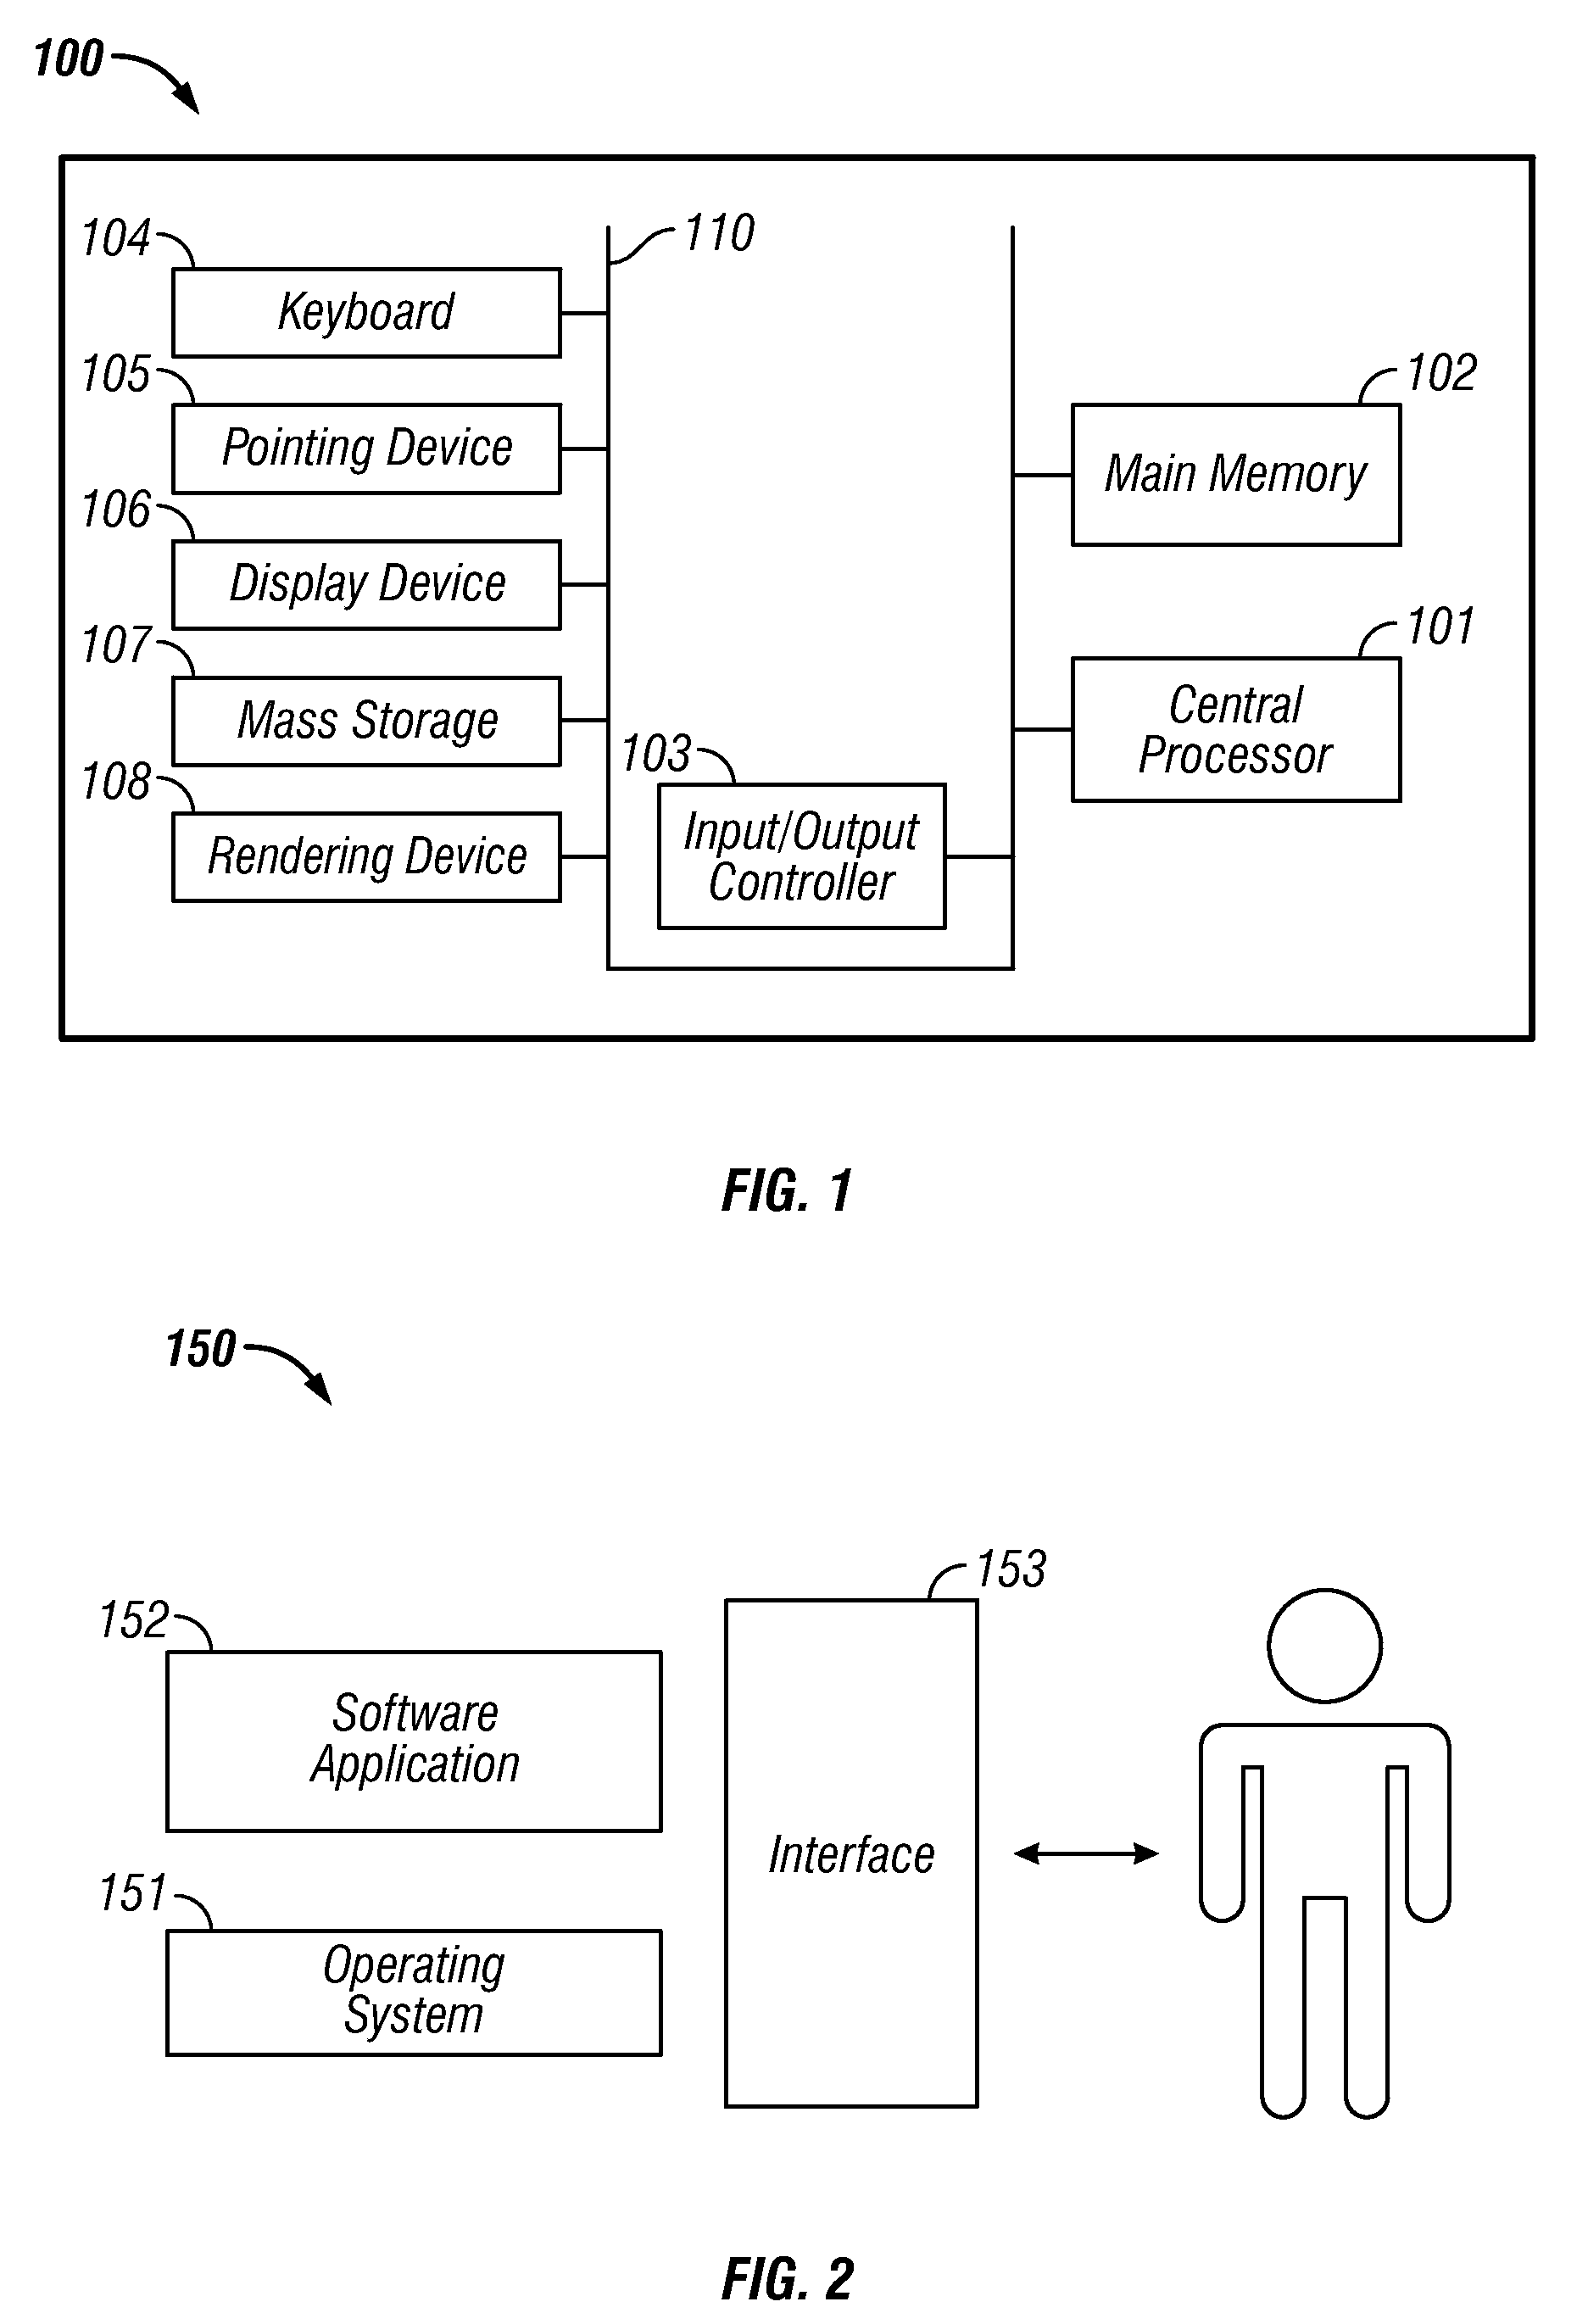 Method and System for Providing an Integrated Building Summary Dashboard